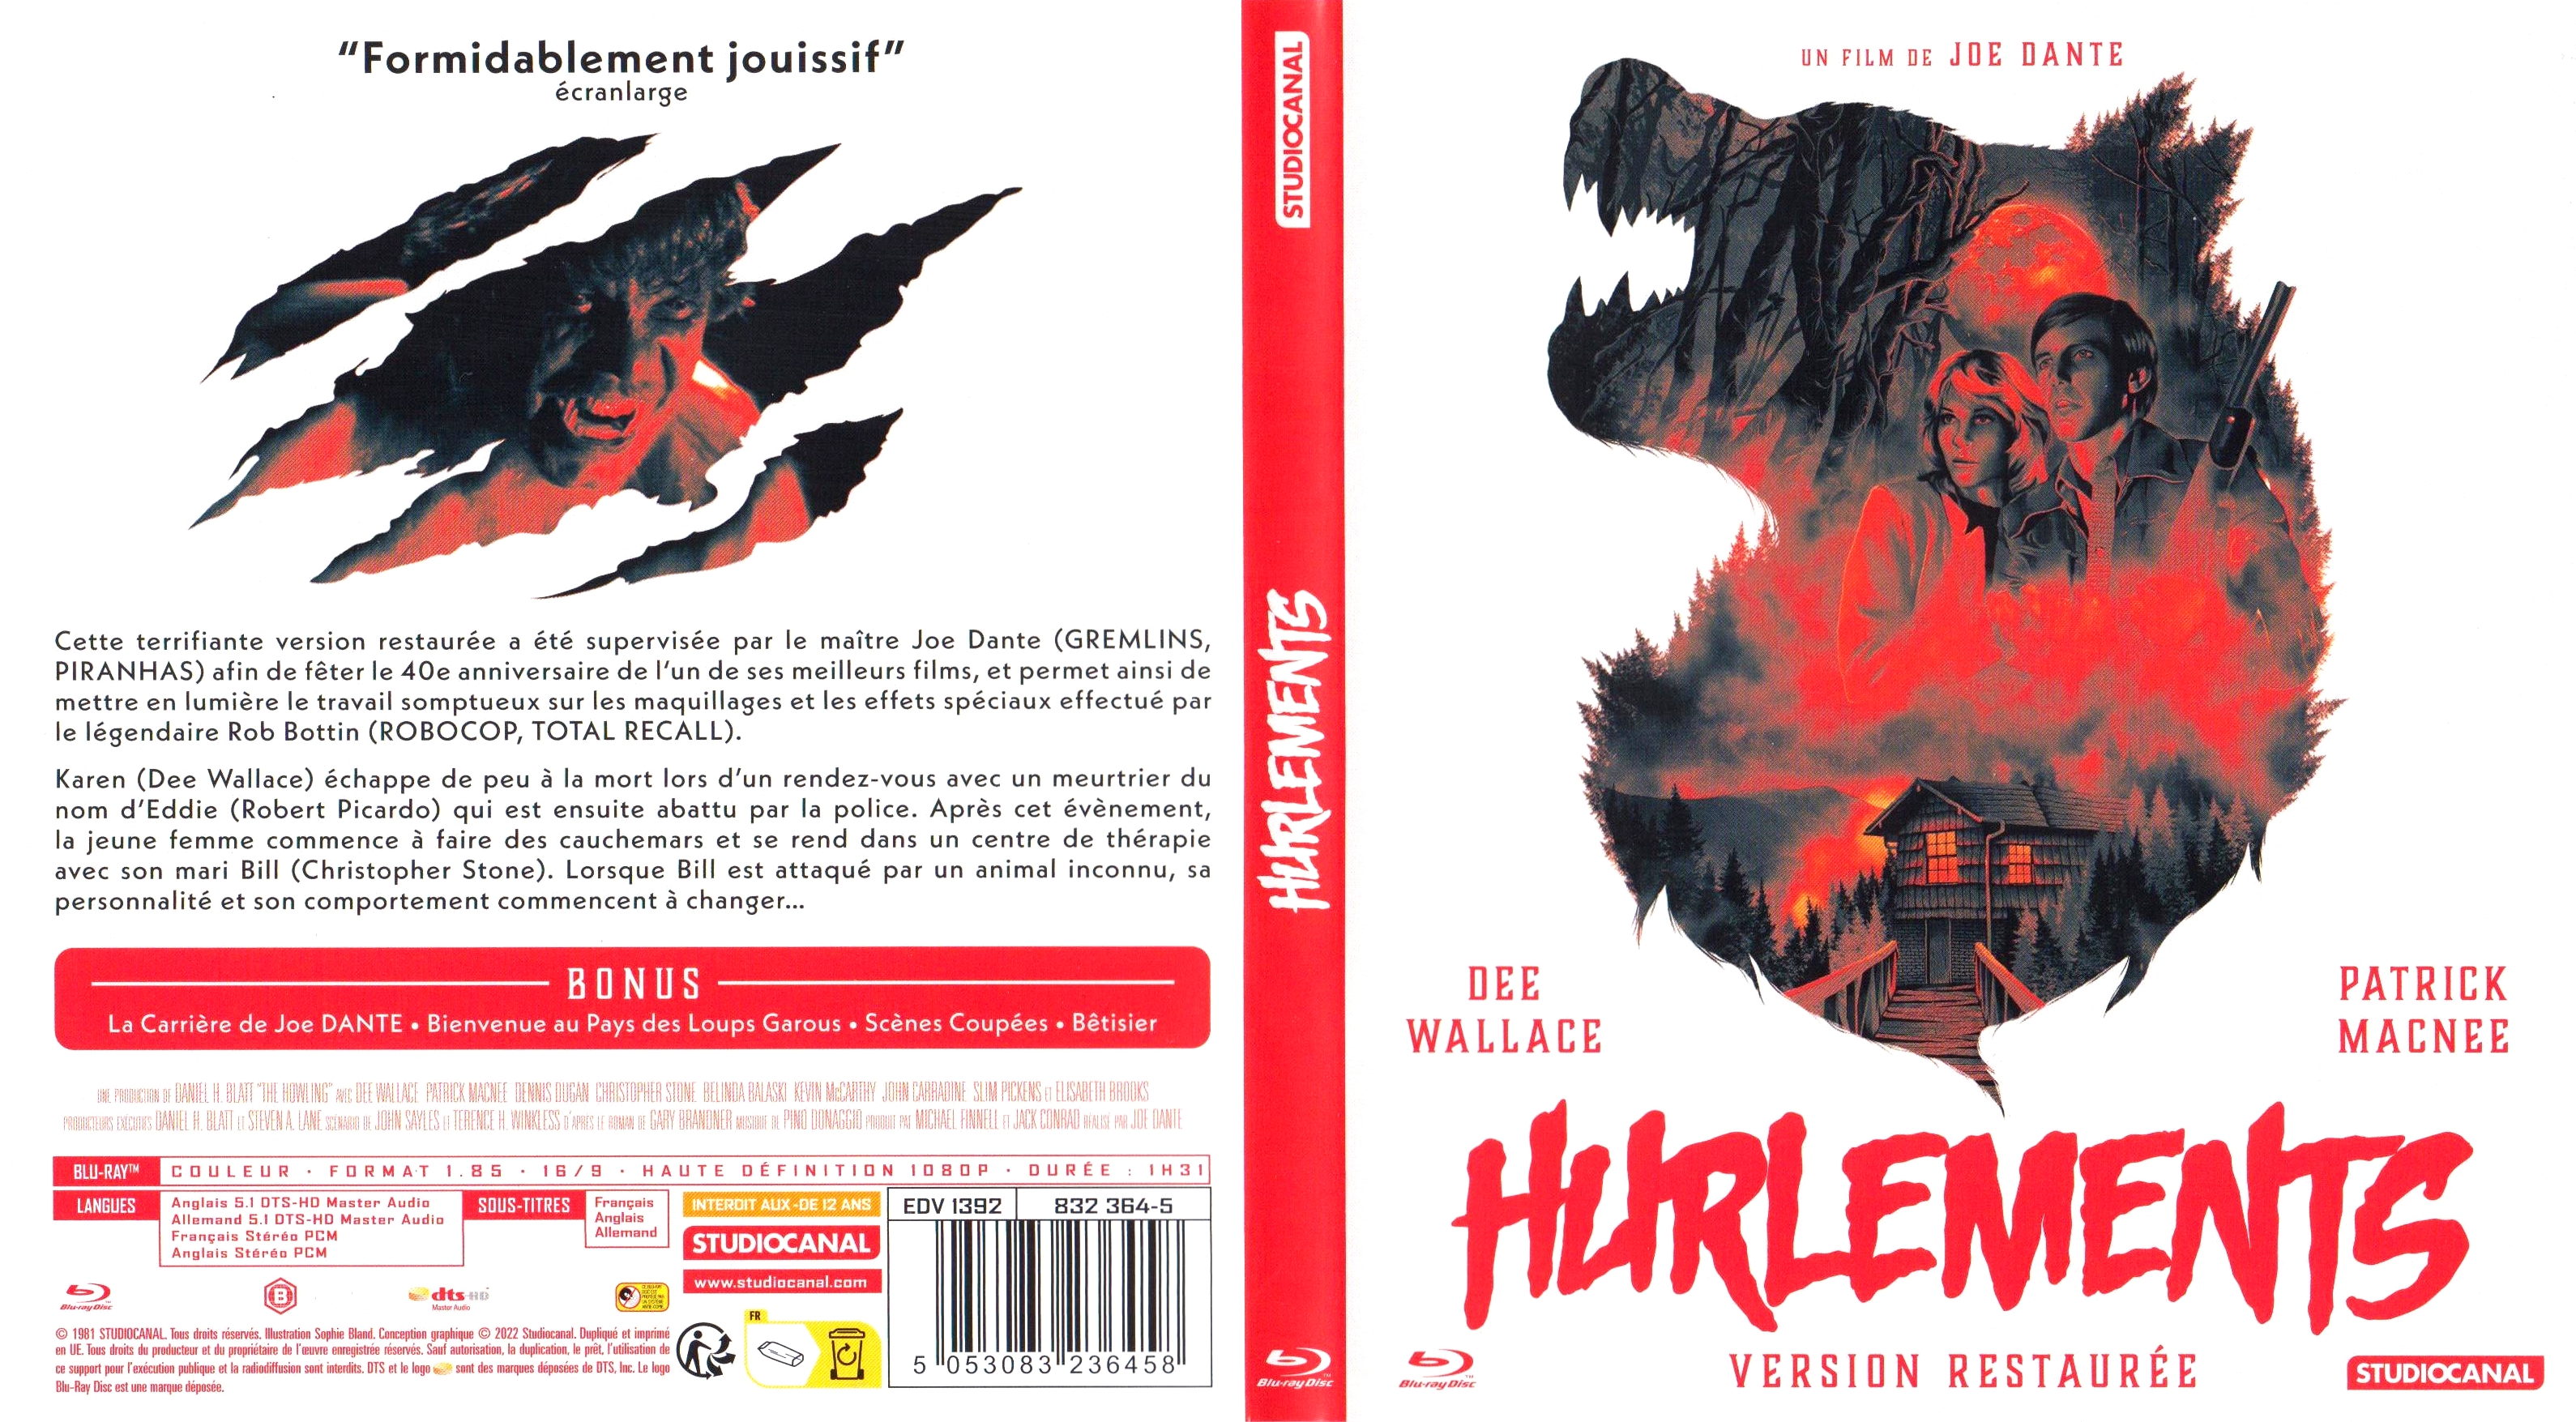 Jaquette DVD Hurlements (BLU-RAY) v2